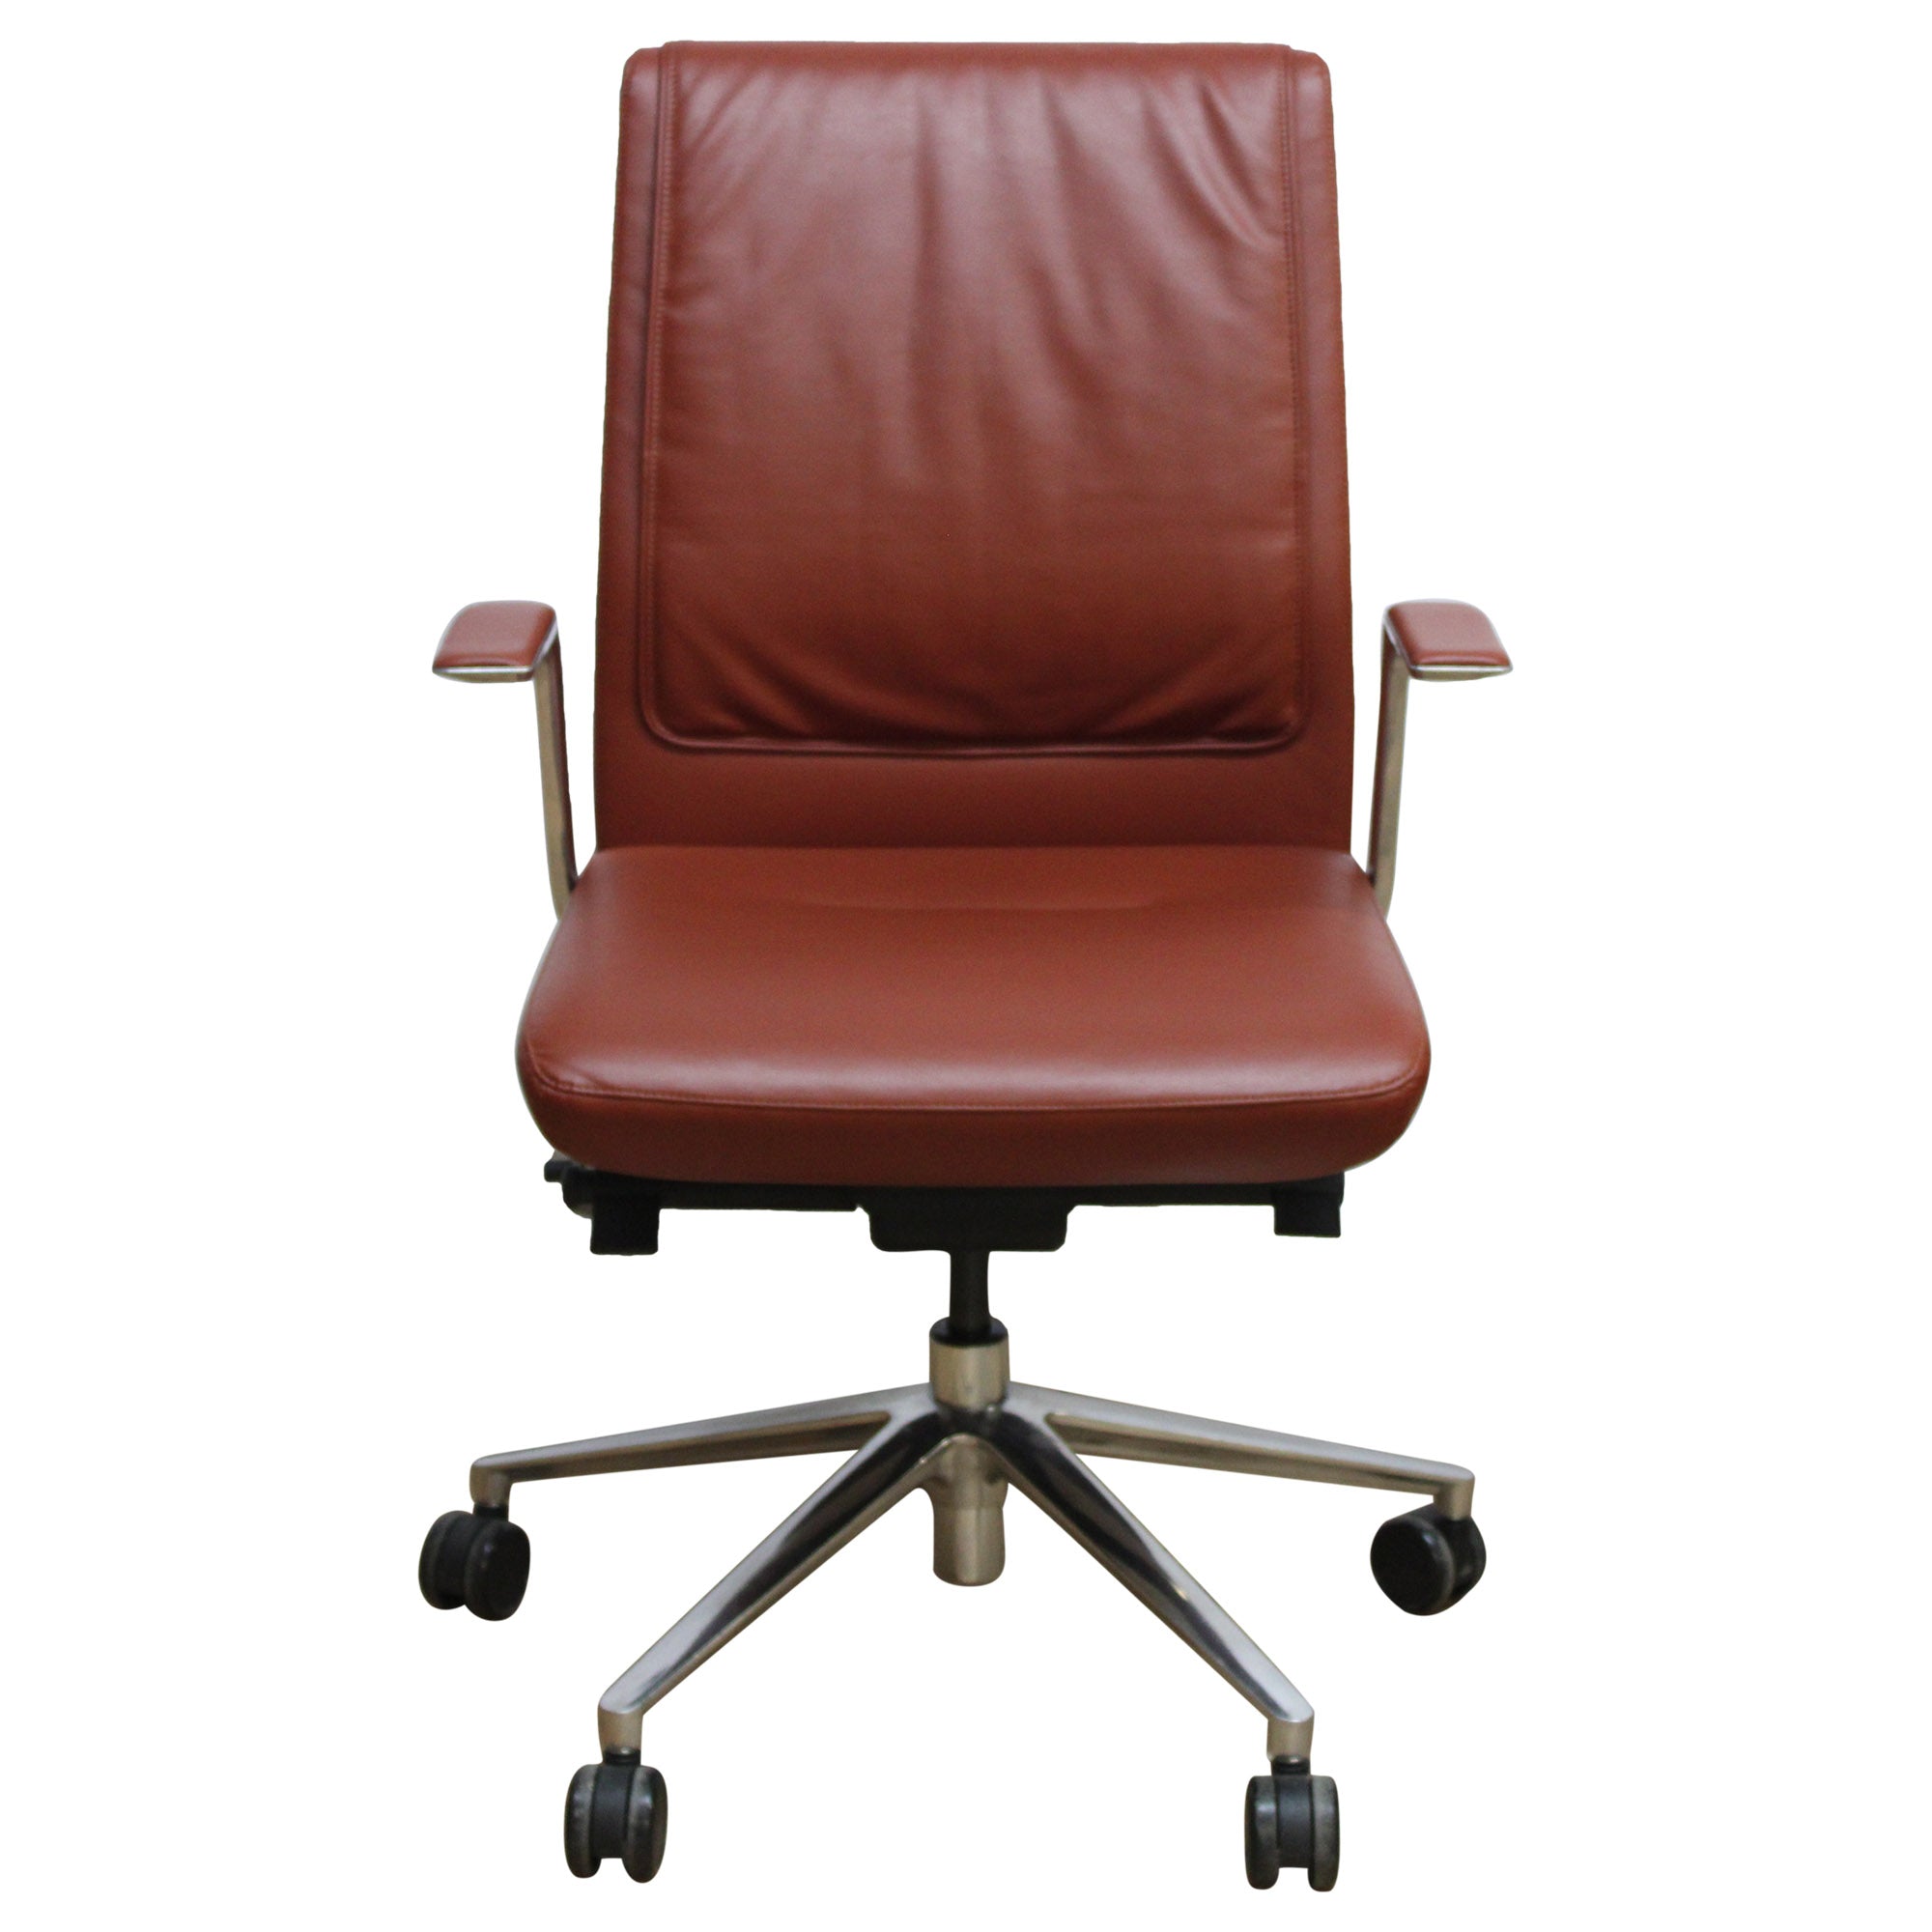 Bernhardt Design Alta Conference Chair, with Back Cushion, Red Clay - Preowned